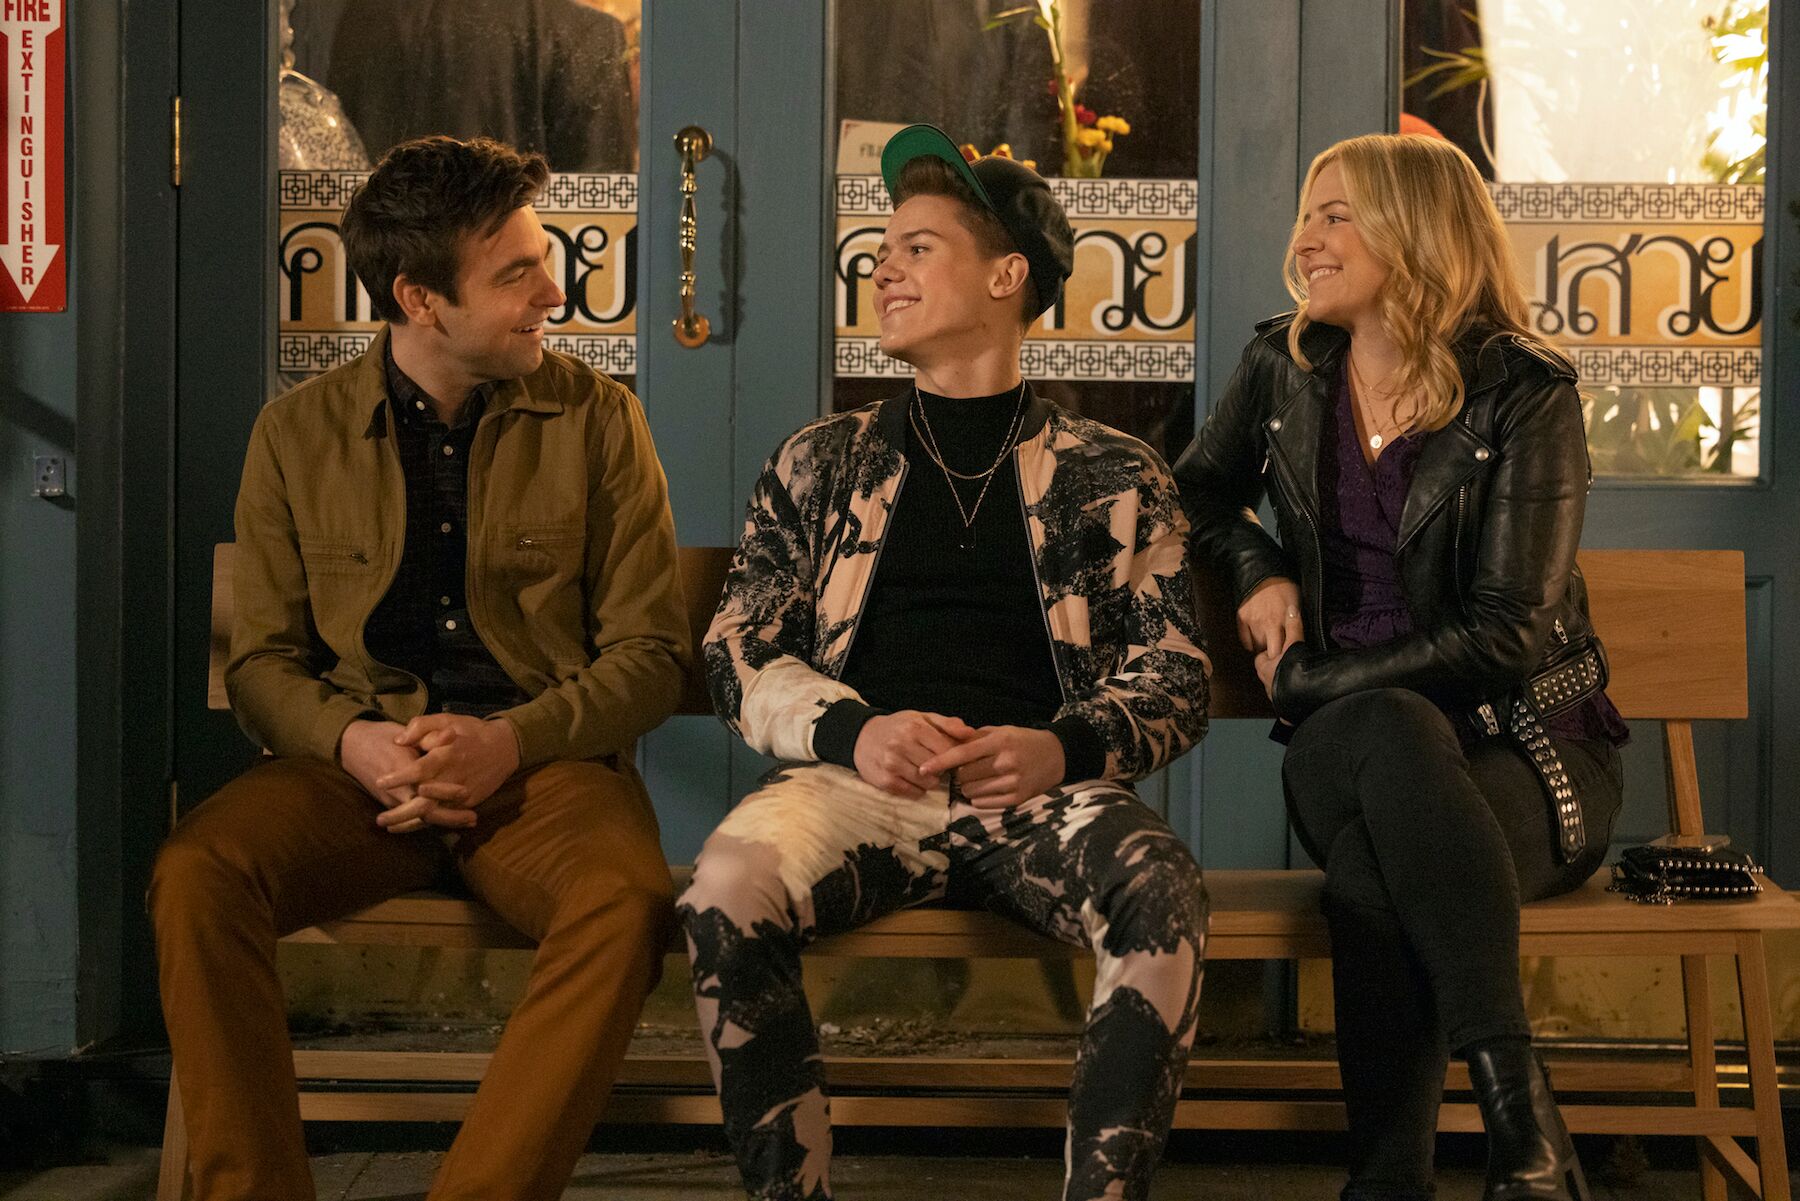 Drew Tarver, Case Walker, and Helene Yorke on the set of 'The Other Two'.